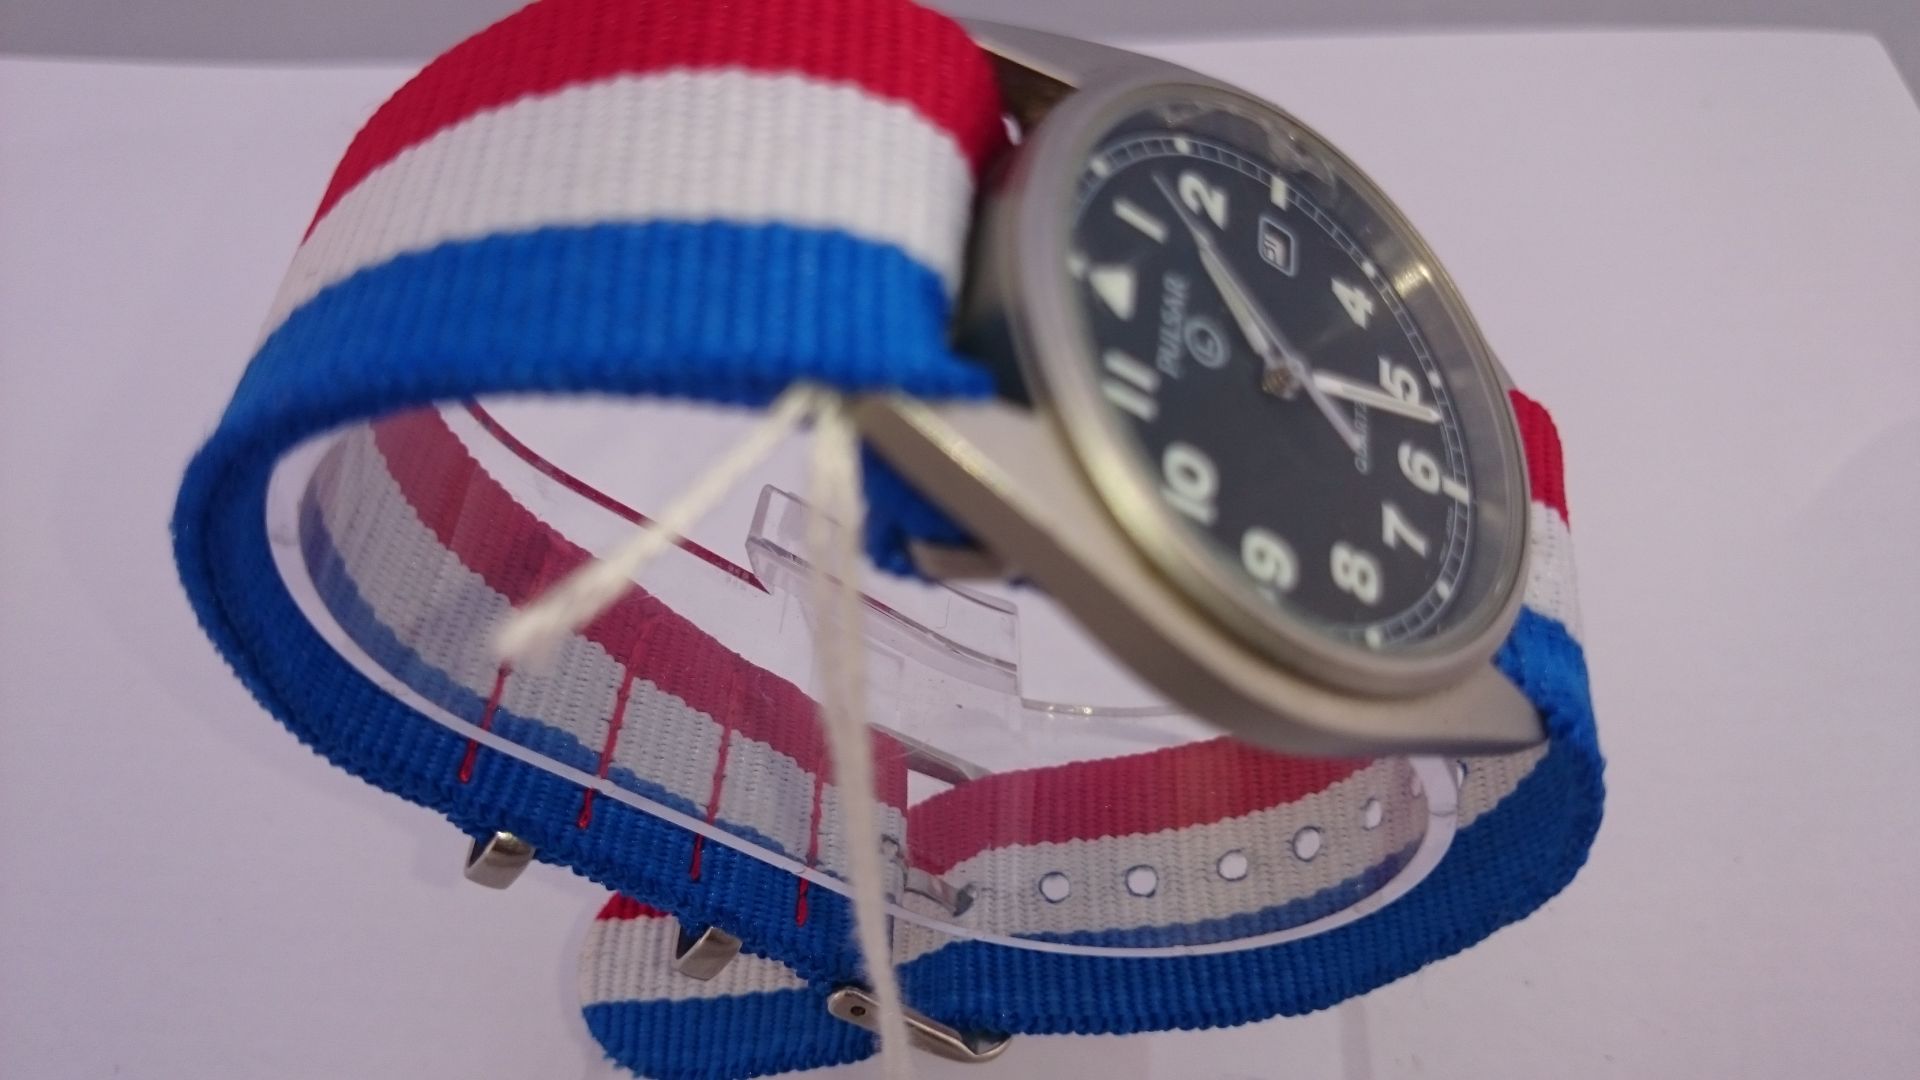 BRITISH ISSUED MILITARY G10 PULSAR WATCH WITH MILITARY STRAP,KEEPING TIME - Image 2 of 5